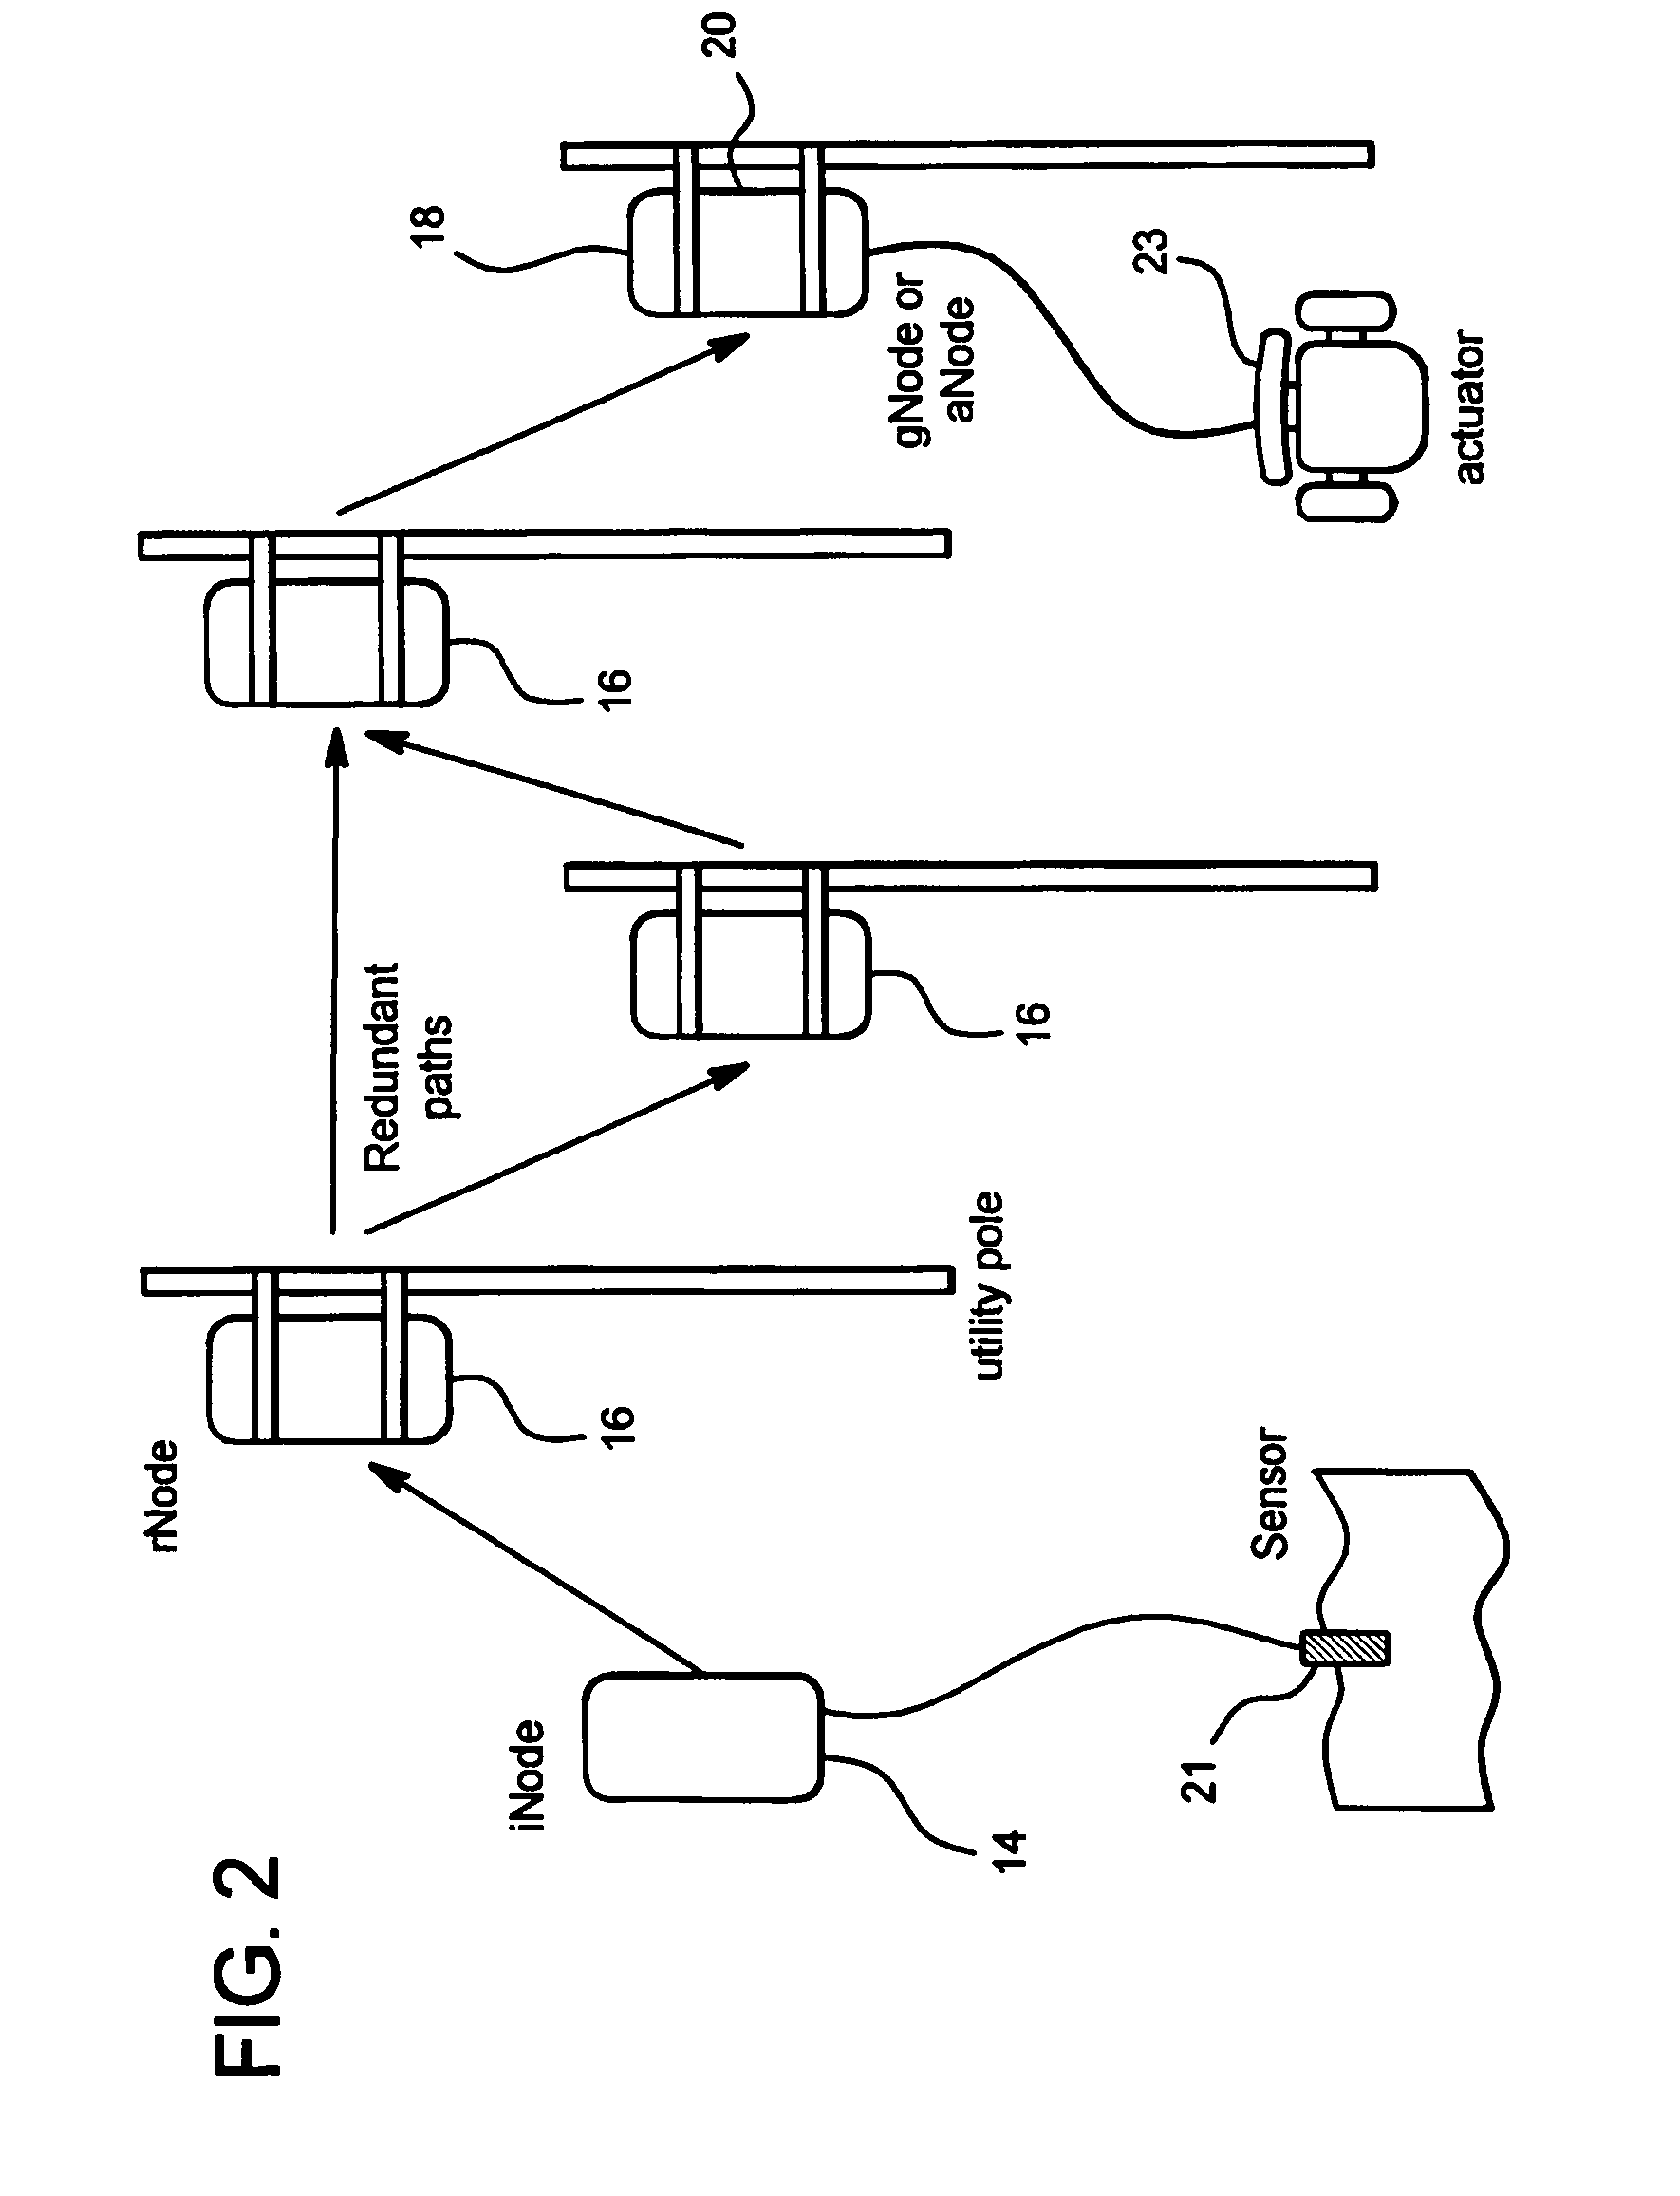 Distributed monitoring and control system